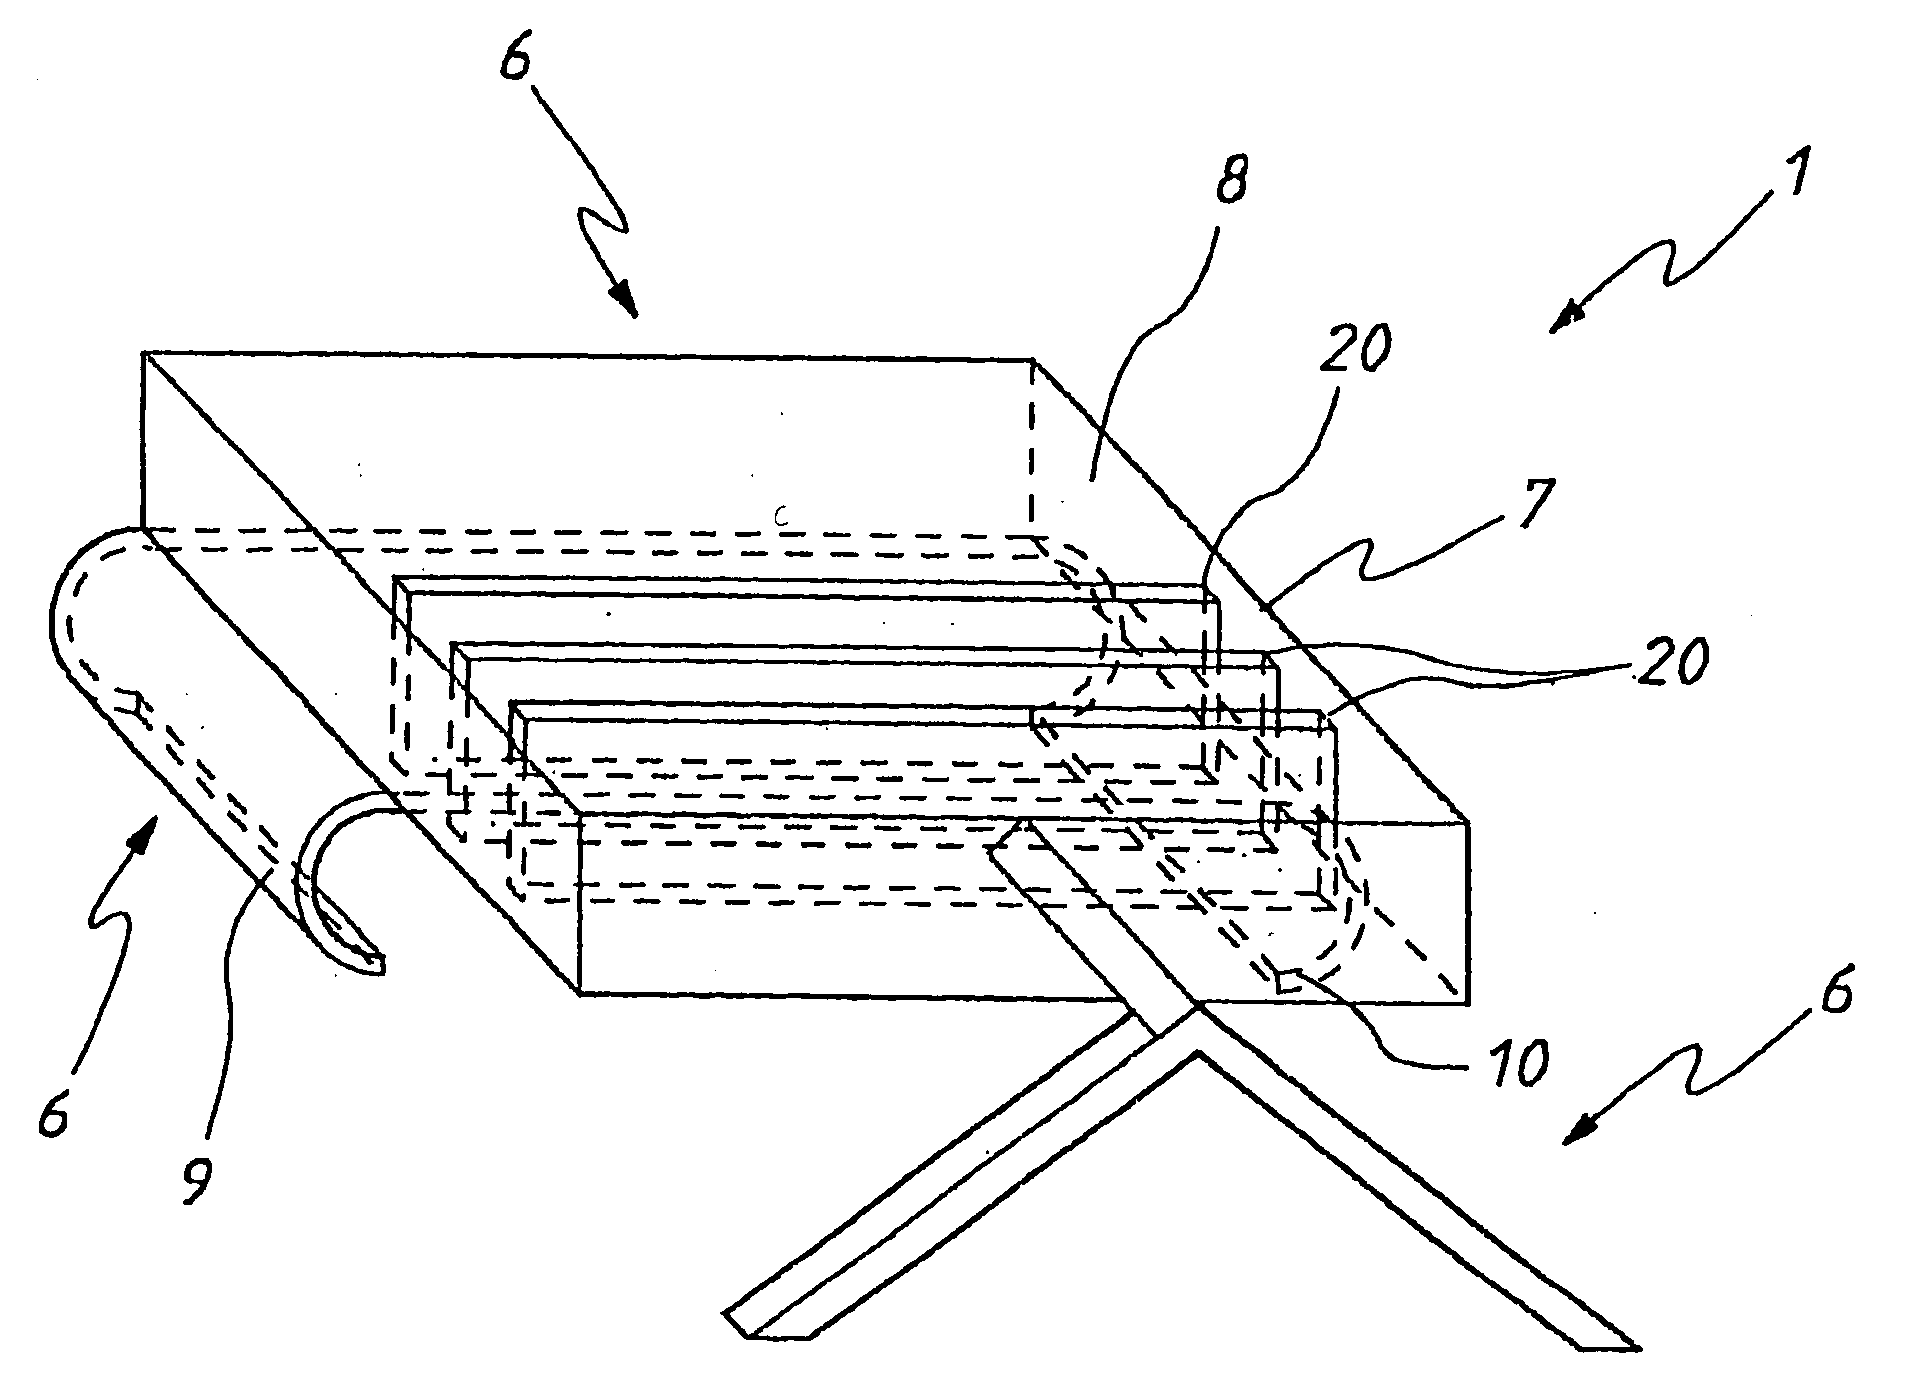 Apparatus and methods for bone surgery